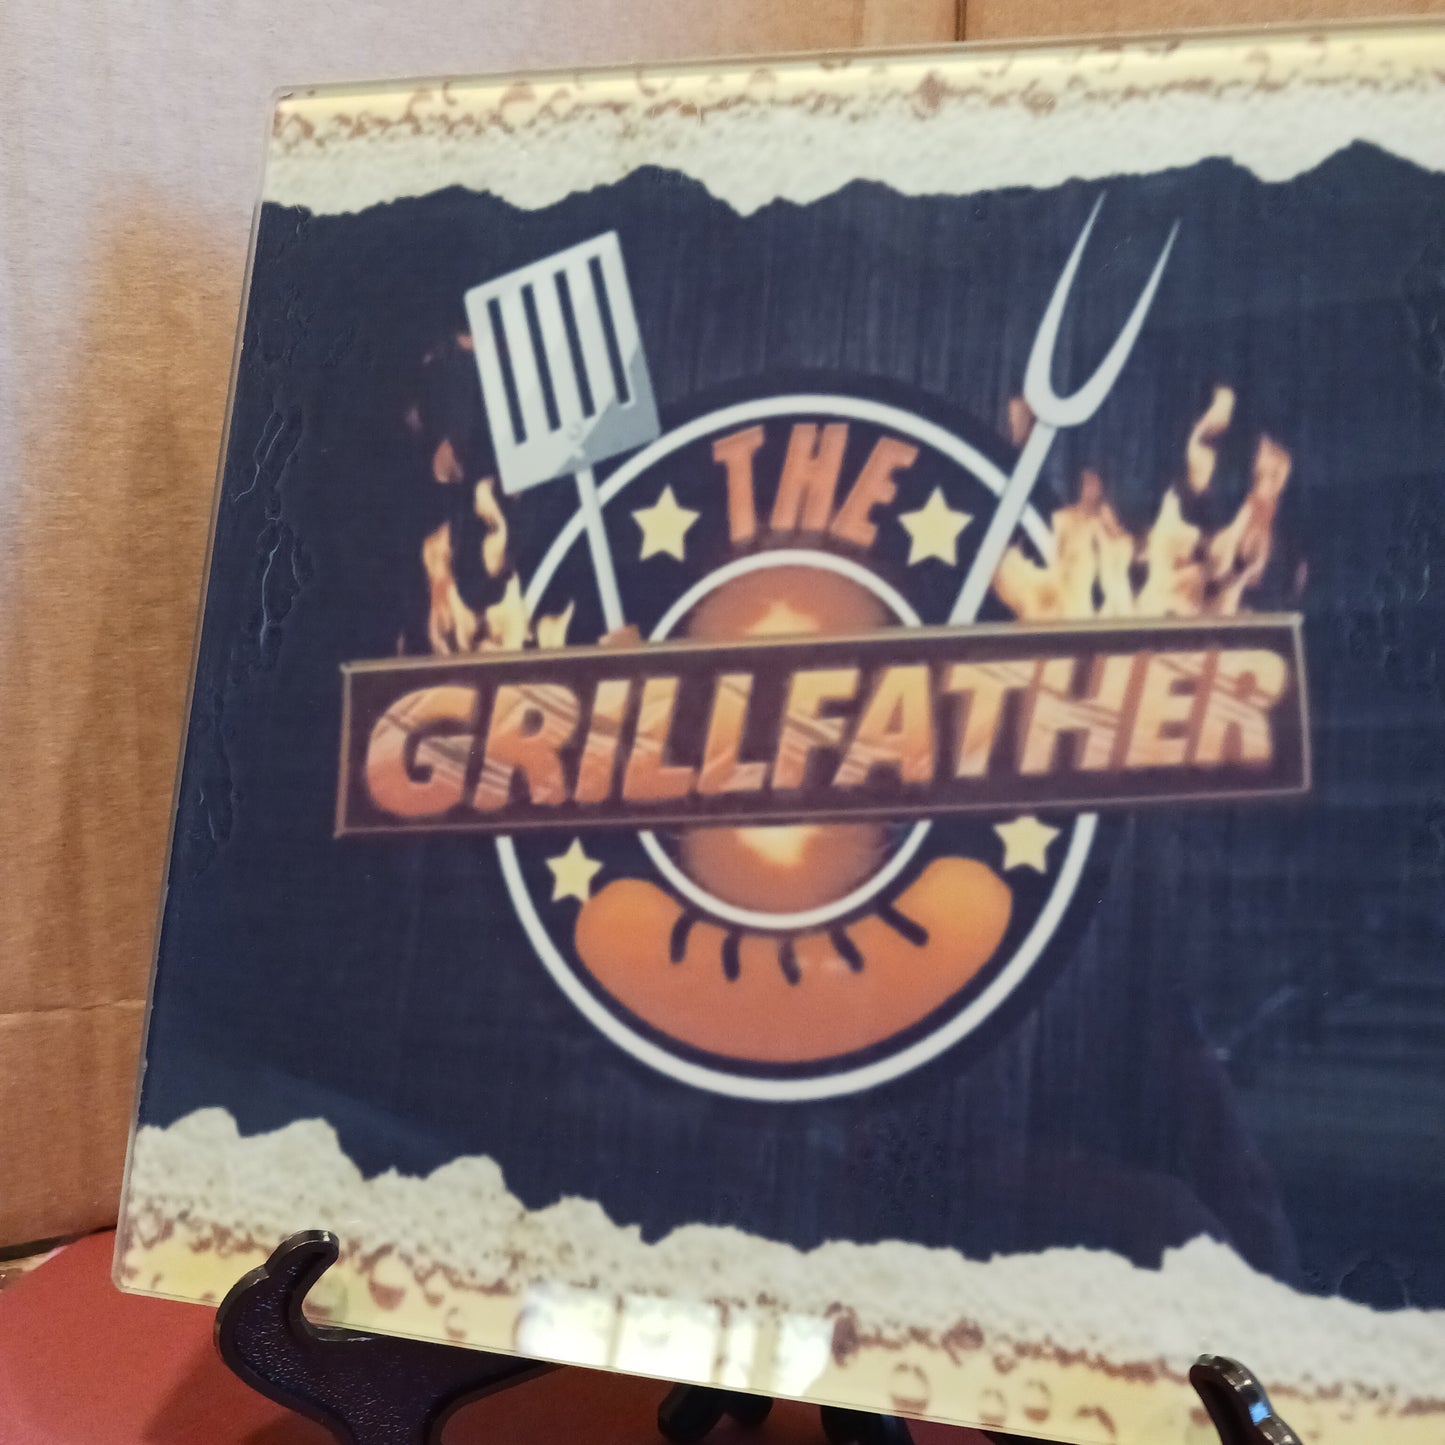 The grill father